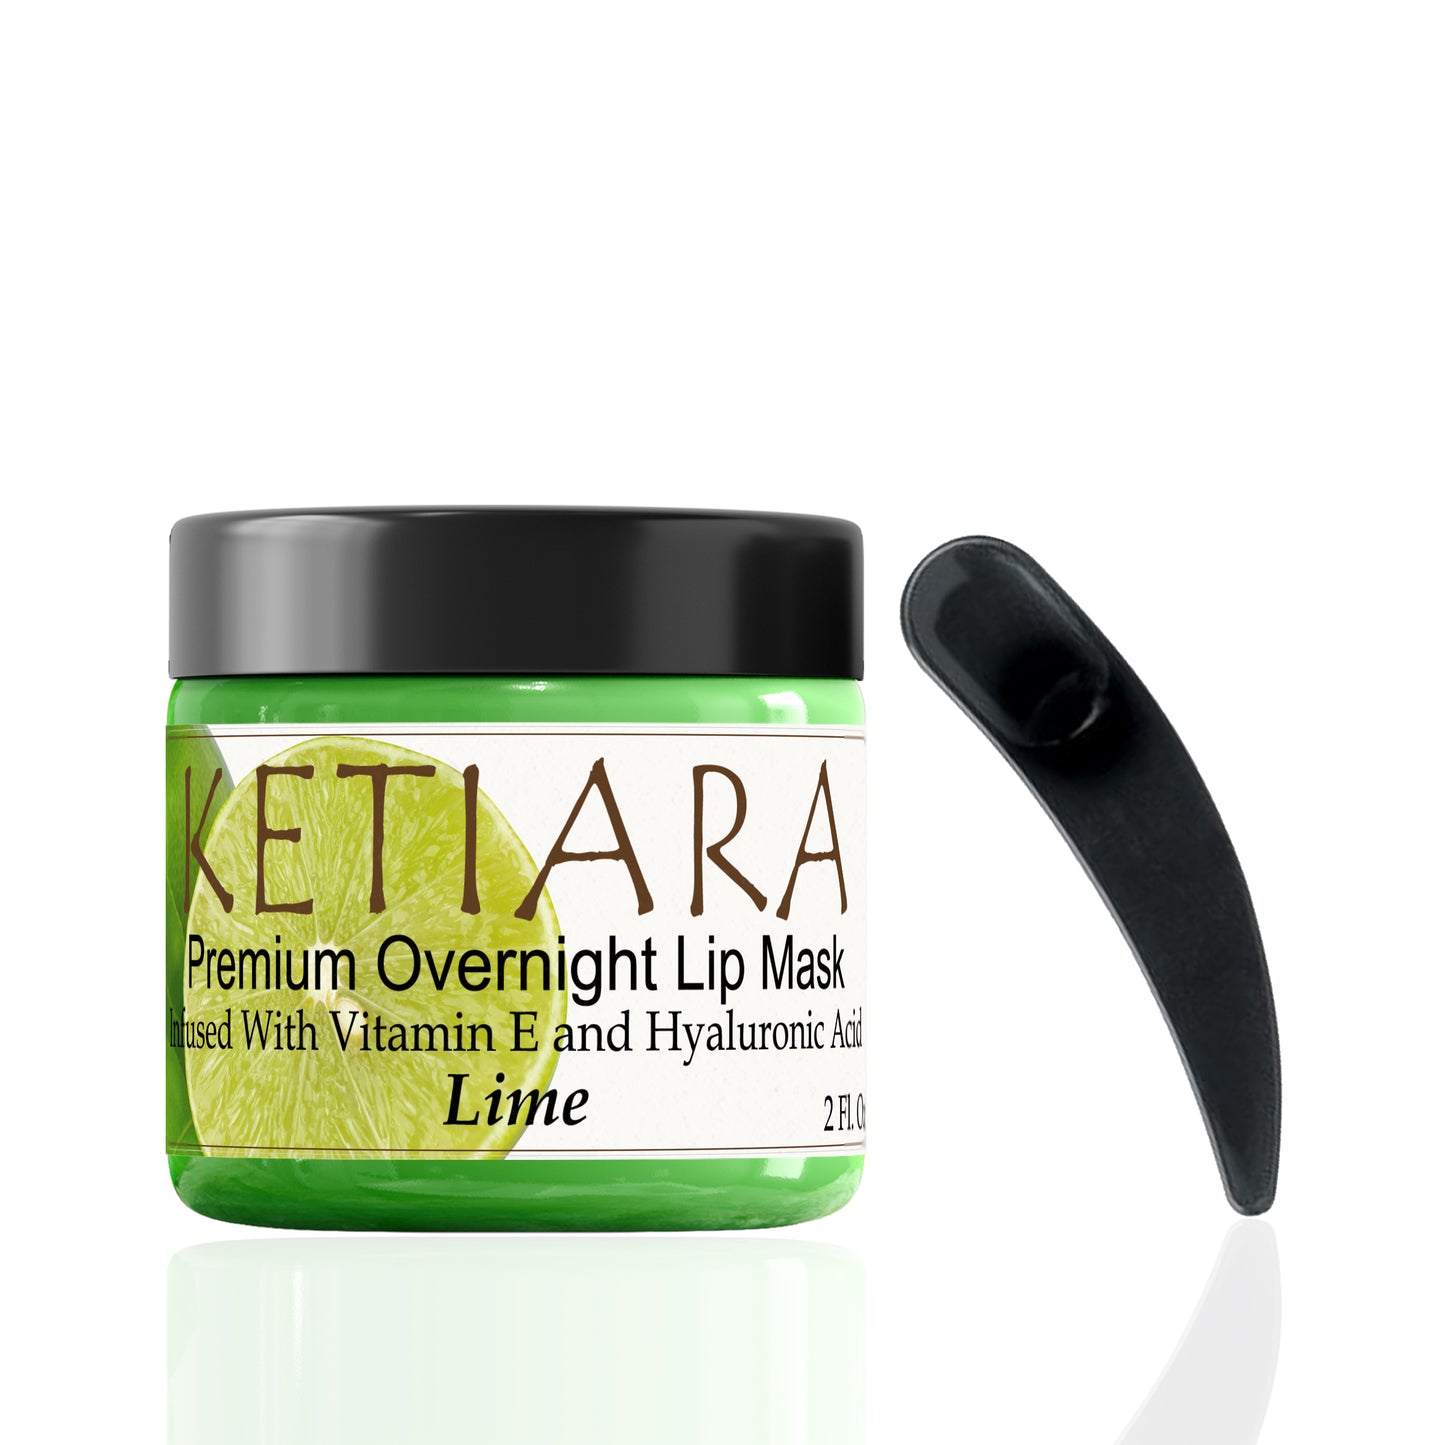 Ketiara Lime Nourishing and Hydrating Lip Sleeping Mask with Vitamin C, Hyaluronic Acid and More